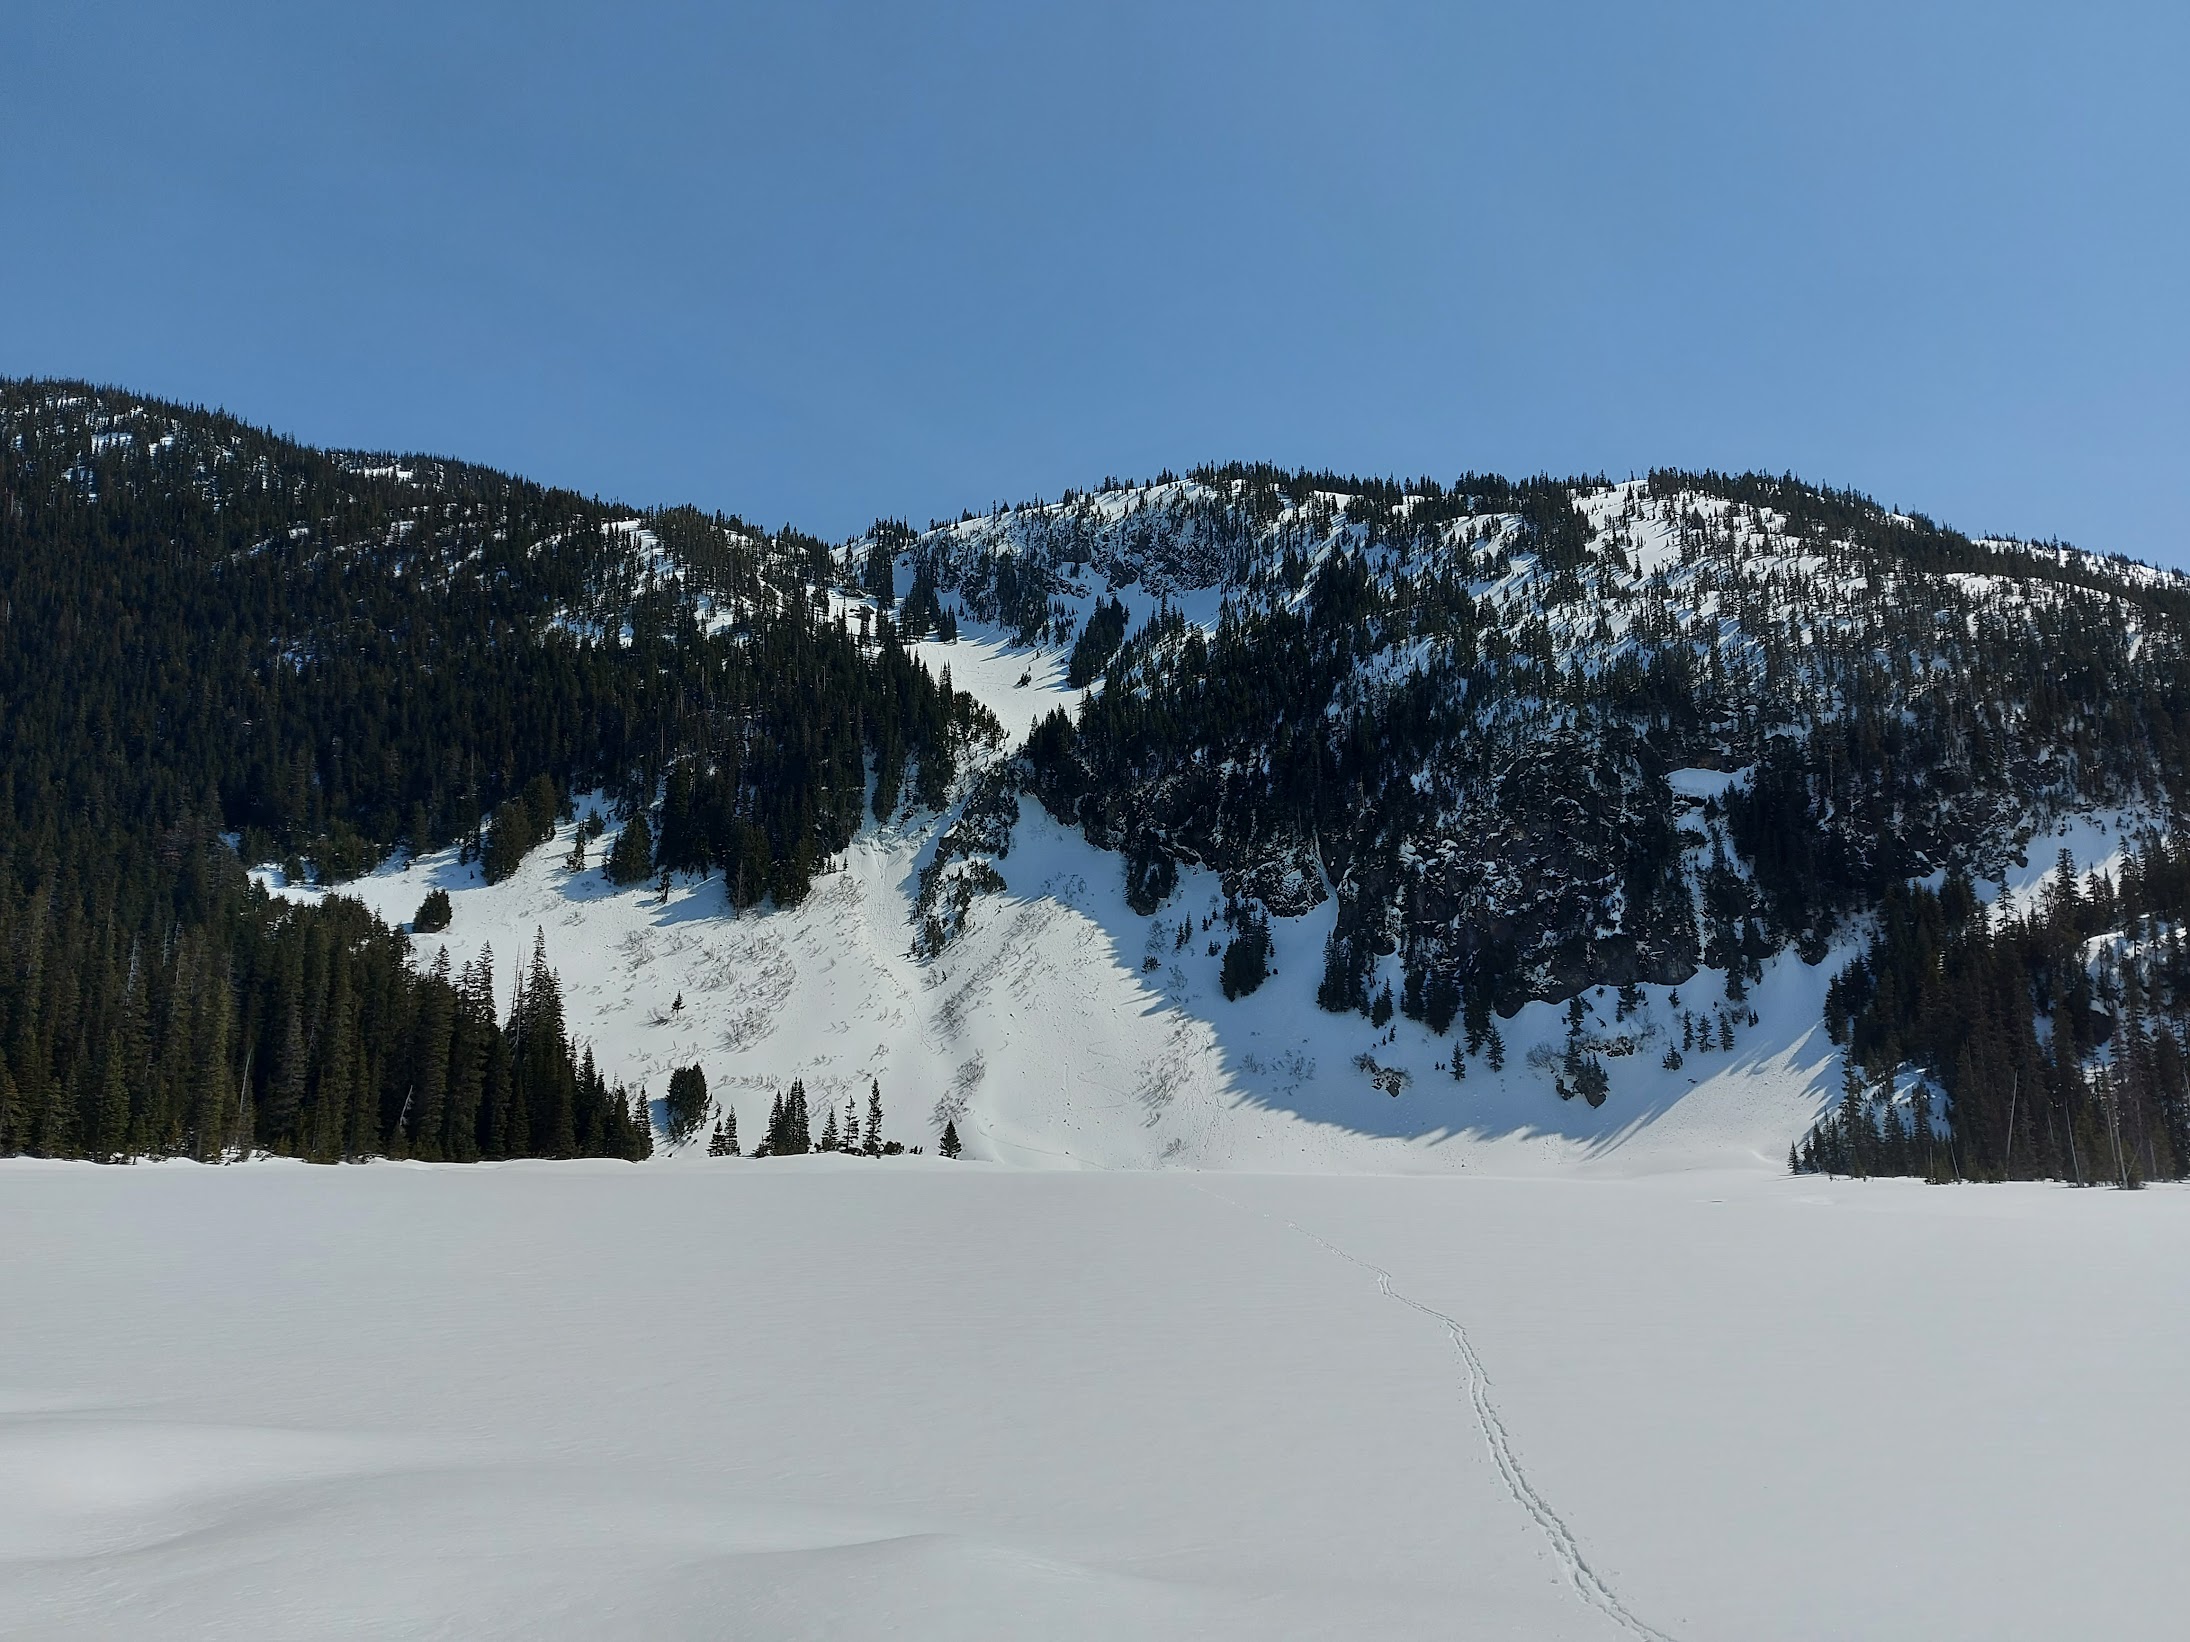 View across frozen lake with skin tracks. Cliff band with small snowy gully above lake.